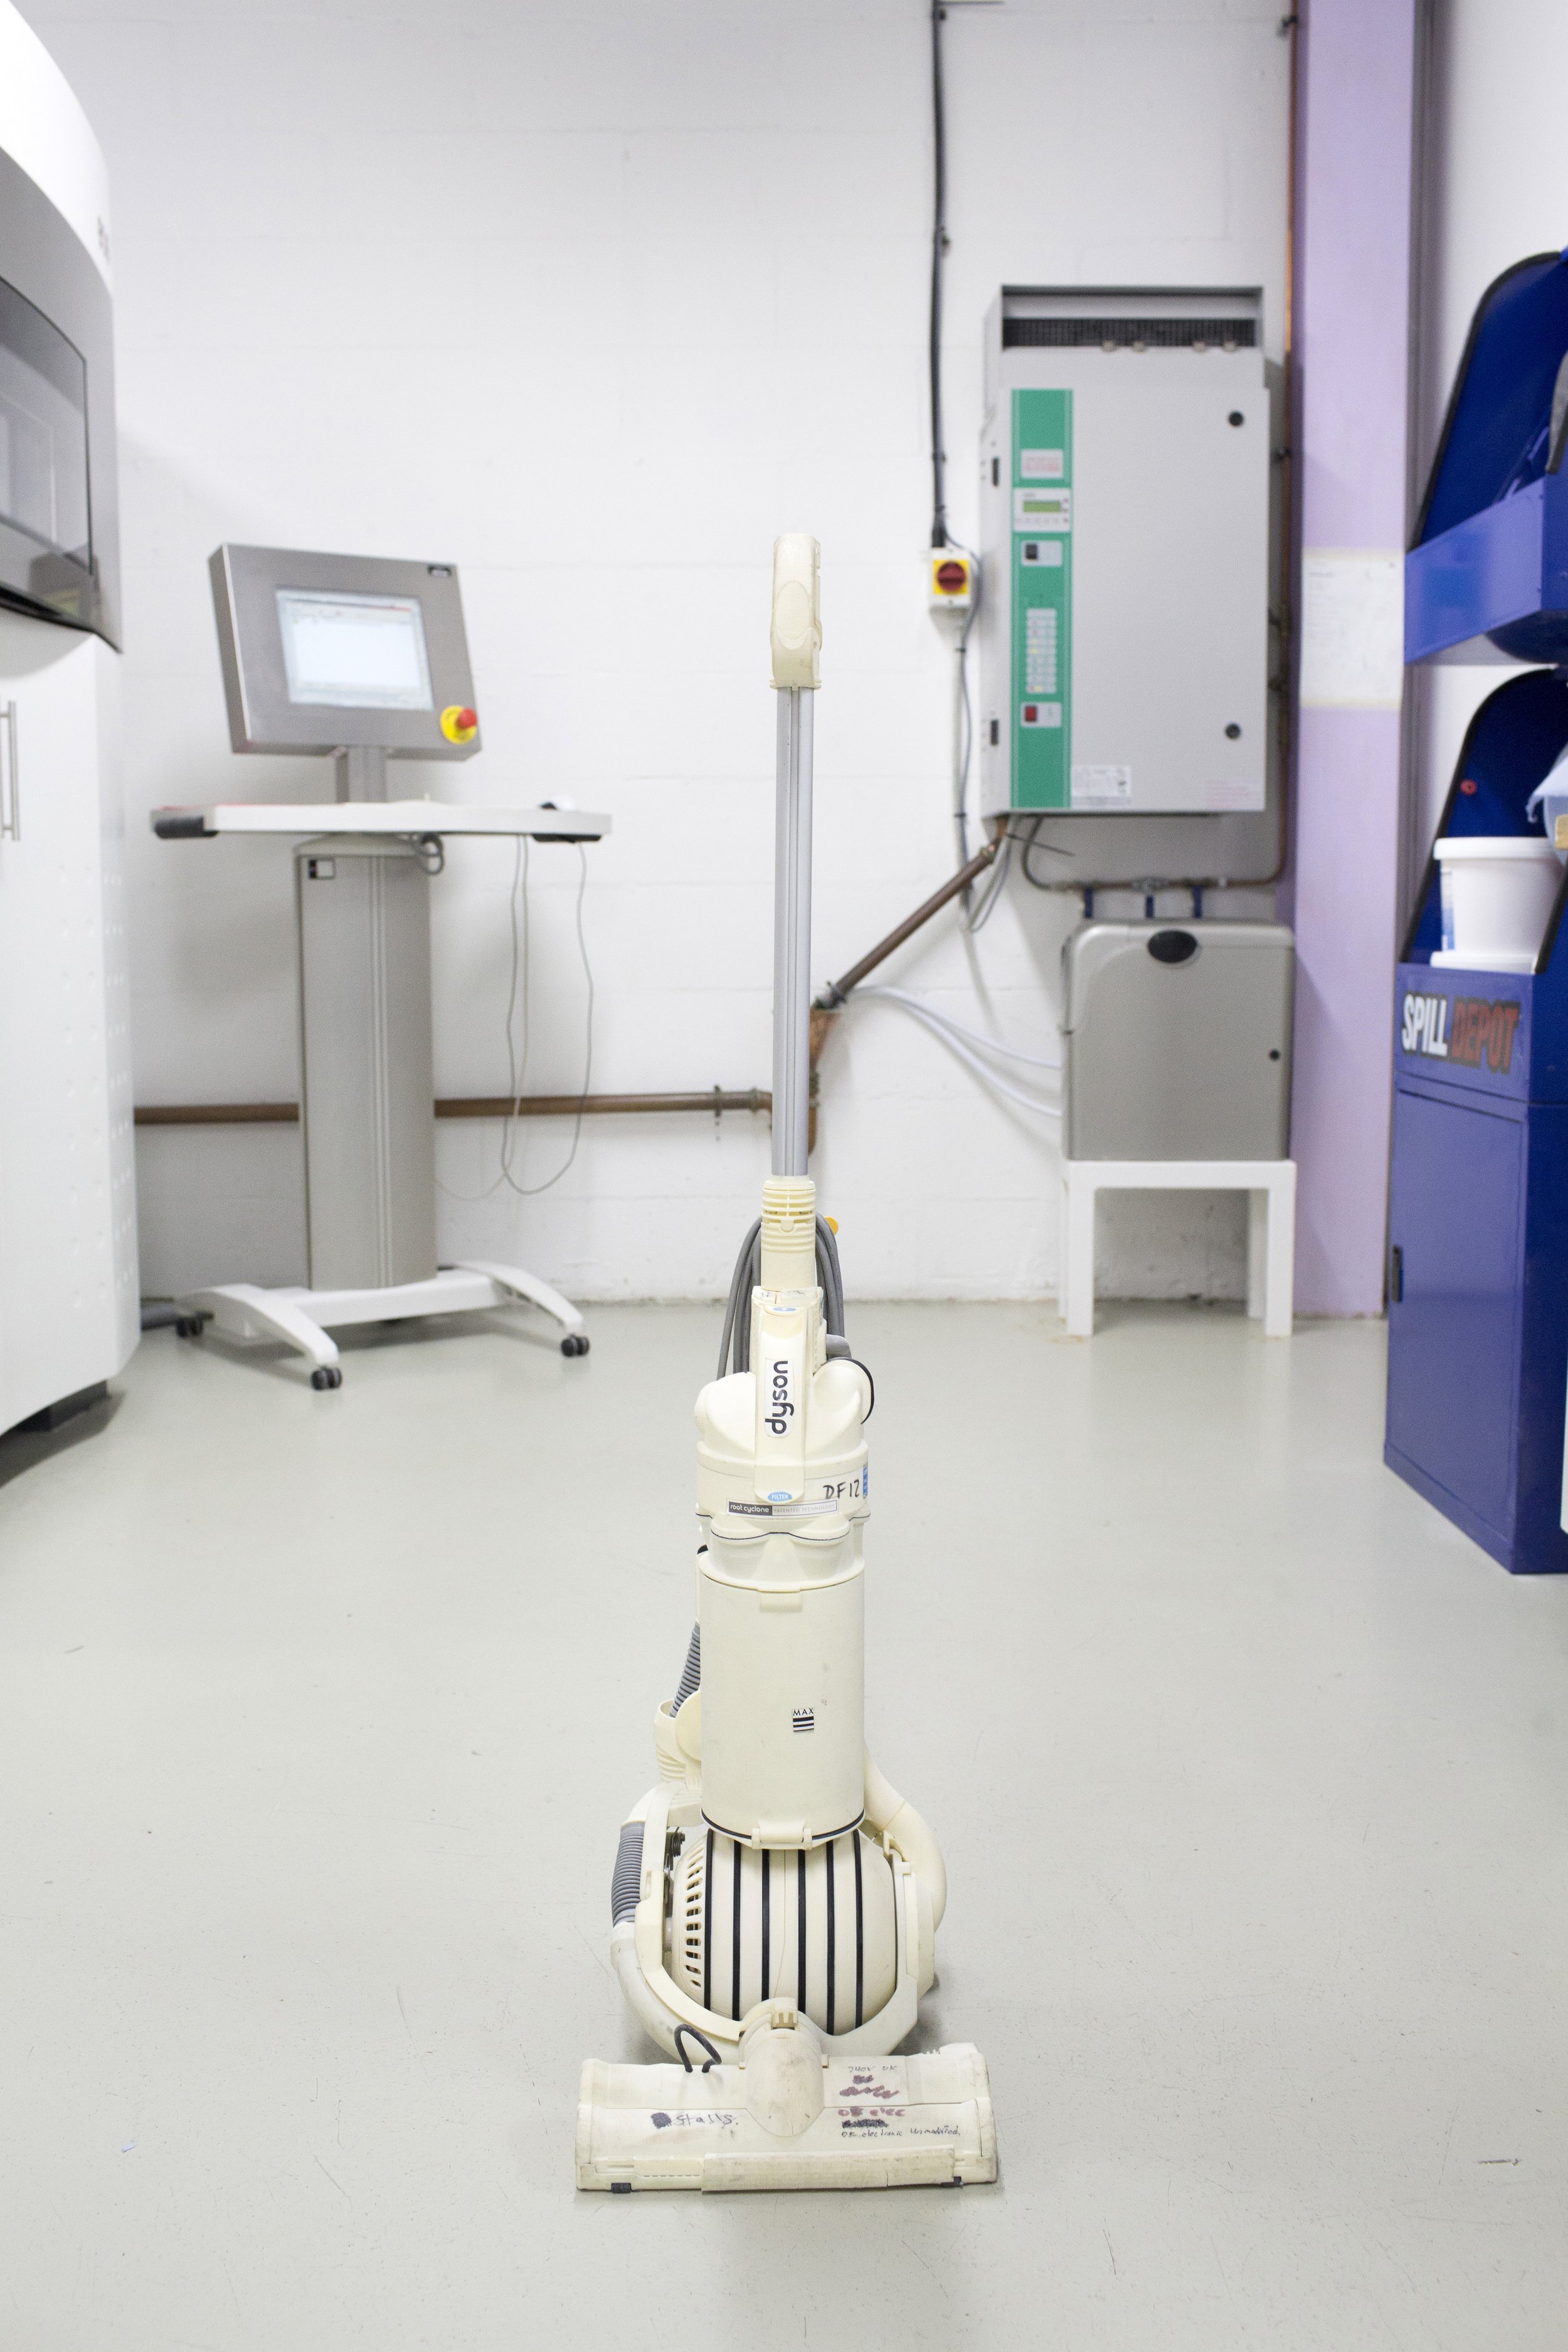   A prototype vacuum cleaner inside the Dyson SLS lab, a prototyping lab for 3D printing.   